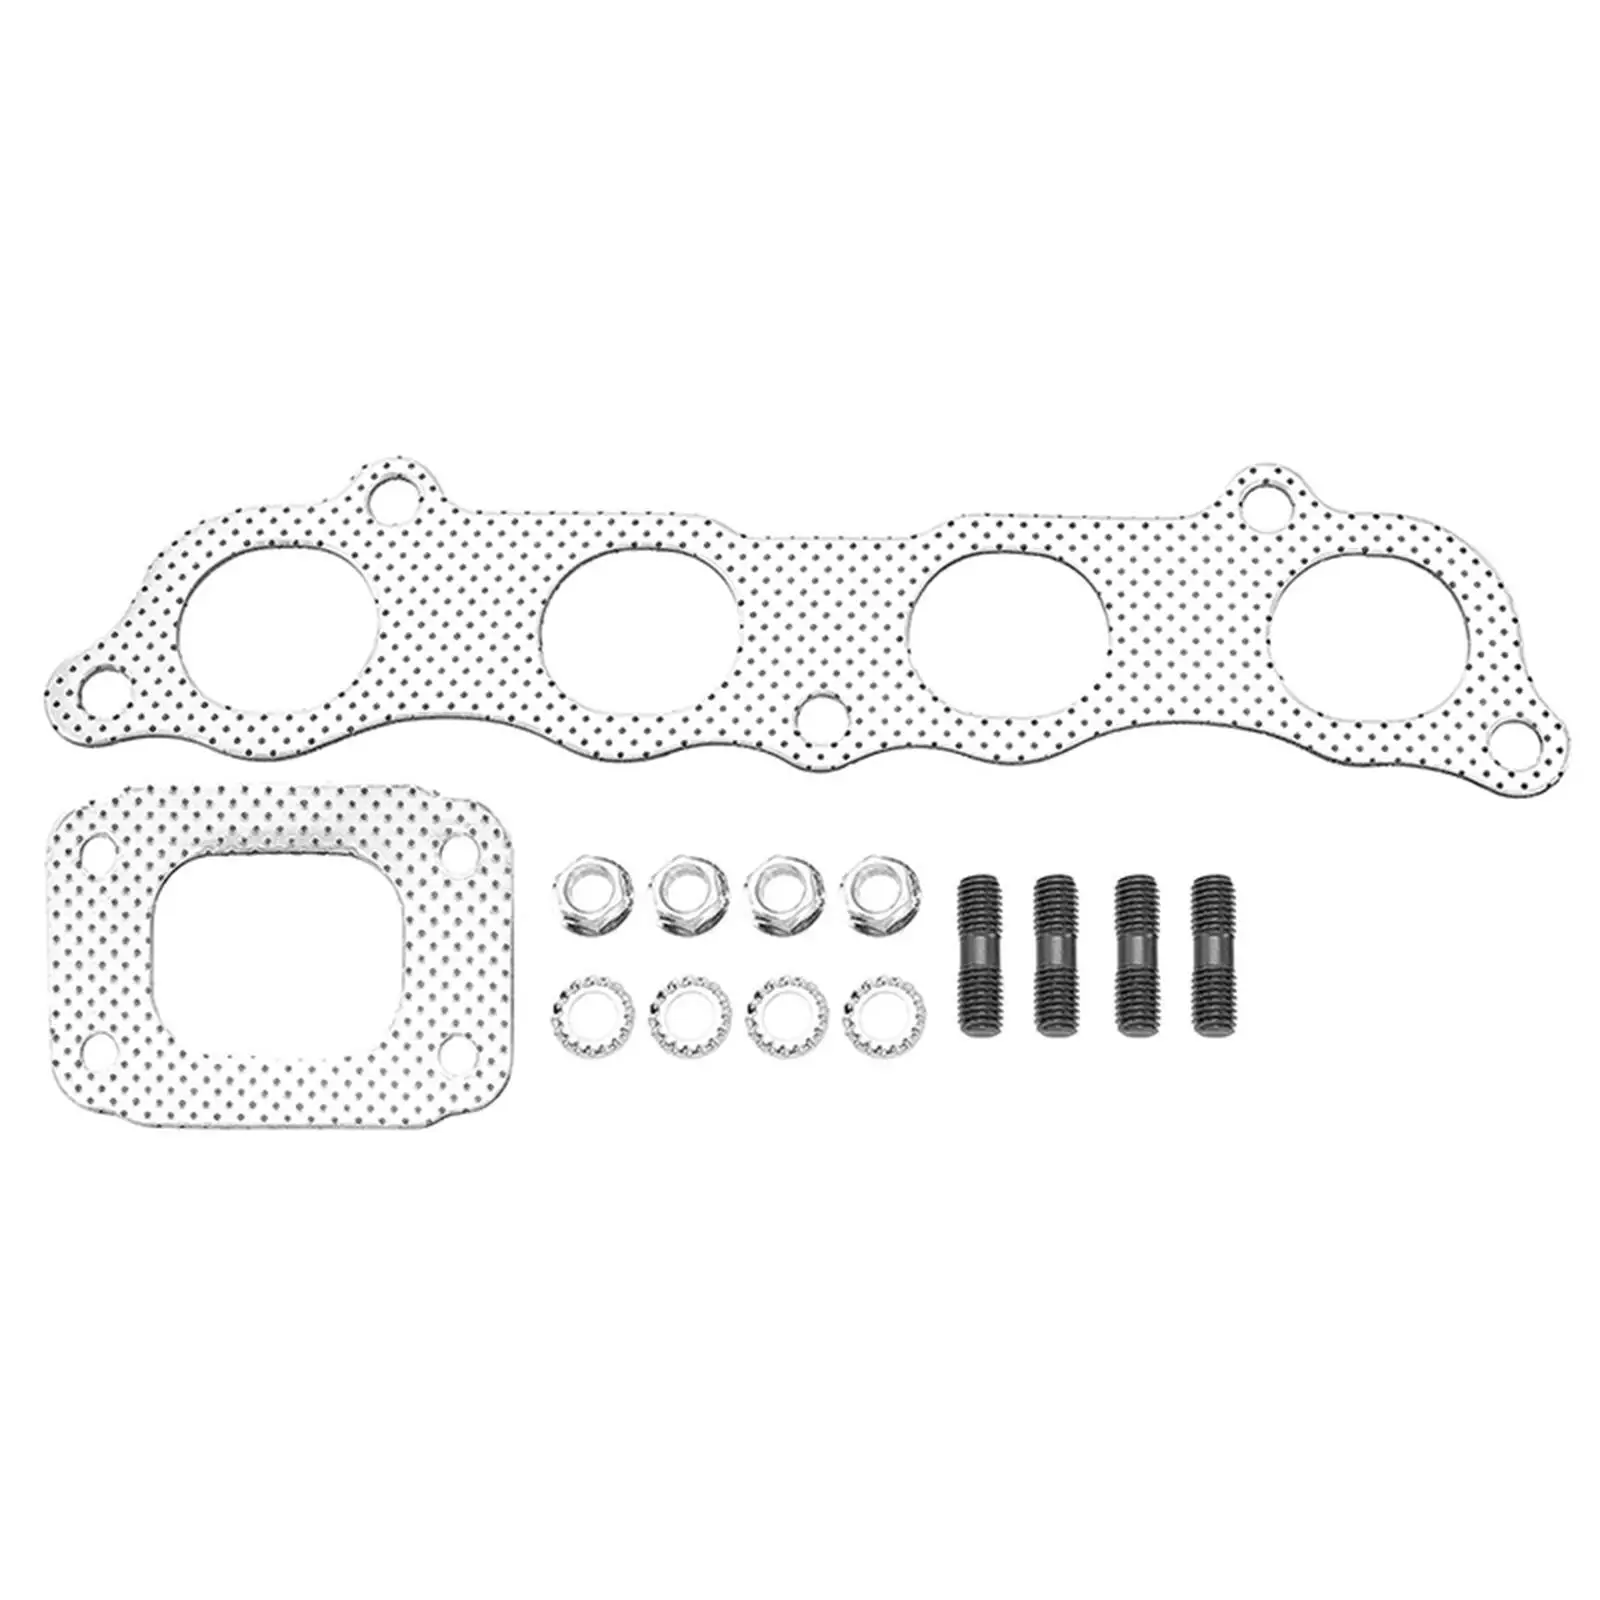 Turbo Manifold T3 with Gasket Kits Car Accessories for Honda Acura RSX Base Type S L4 2.0L Civic SI RSX K20 Easy to Install